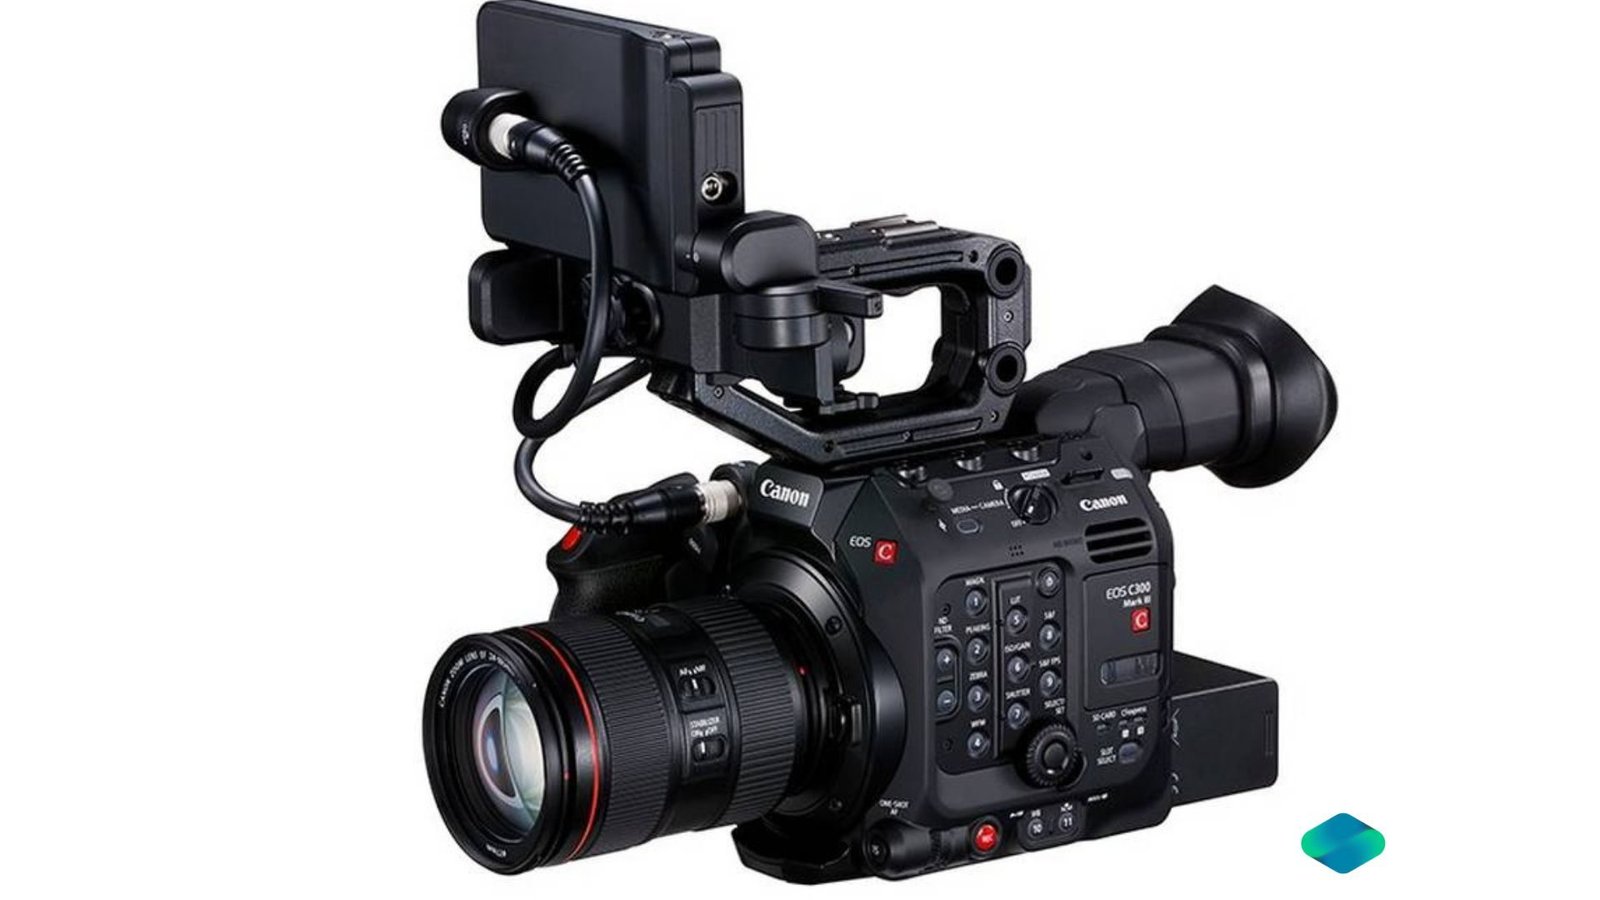 Rent Canon C-300 Mark III Camera with Cp.3 Lens Kit in Delhi NCR, Rent Canon EOS R-5 Mirror Less 8K Camera with Cp.2 Lens Kit in Delhi NCR, Camera accessories, Camera lenses for rent, in Delhi Gurgaon Noida, hire Shooting equipment, Lighting equipment rental, Film gear rental for Video production, camera rental company in Delhi, film equipment rental company